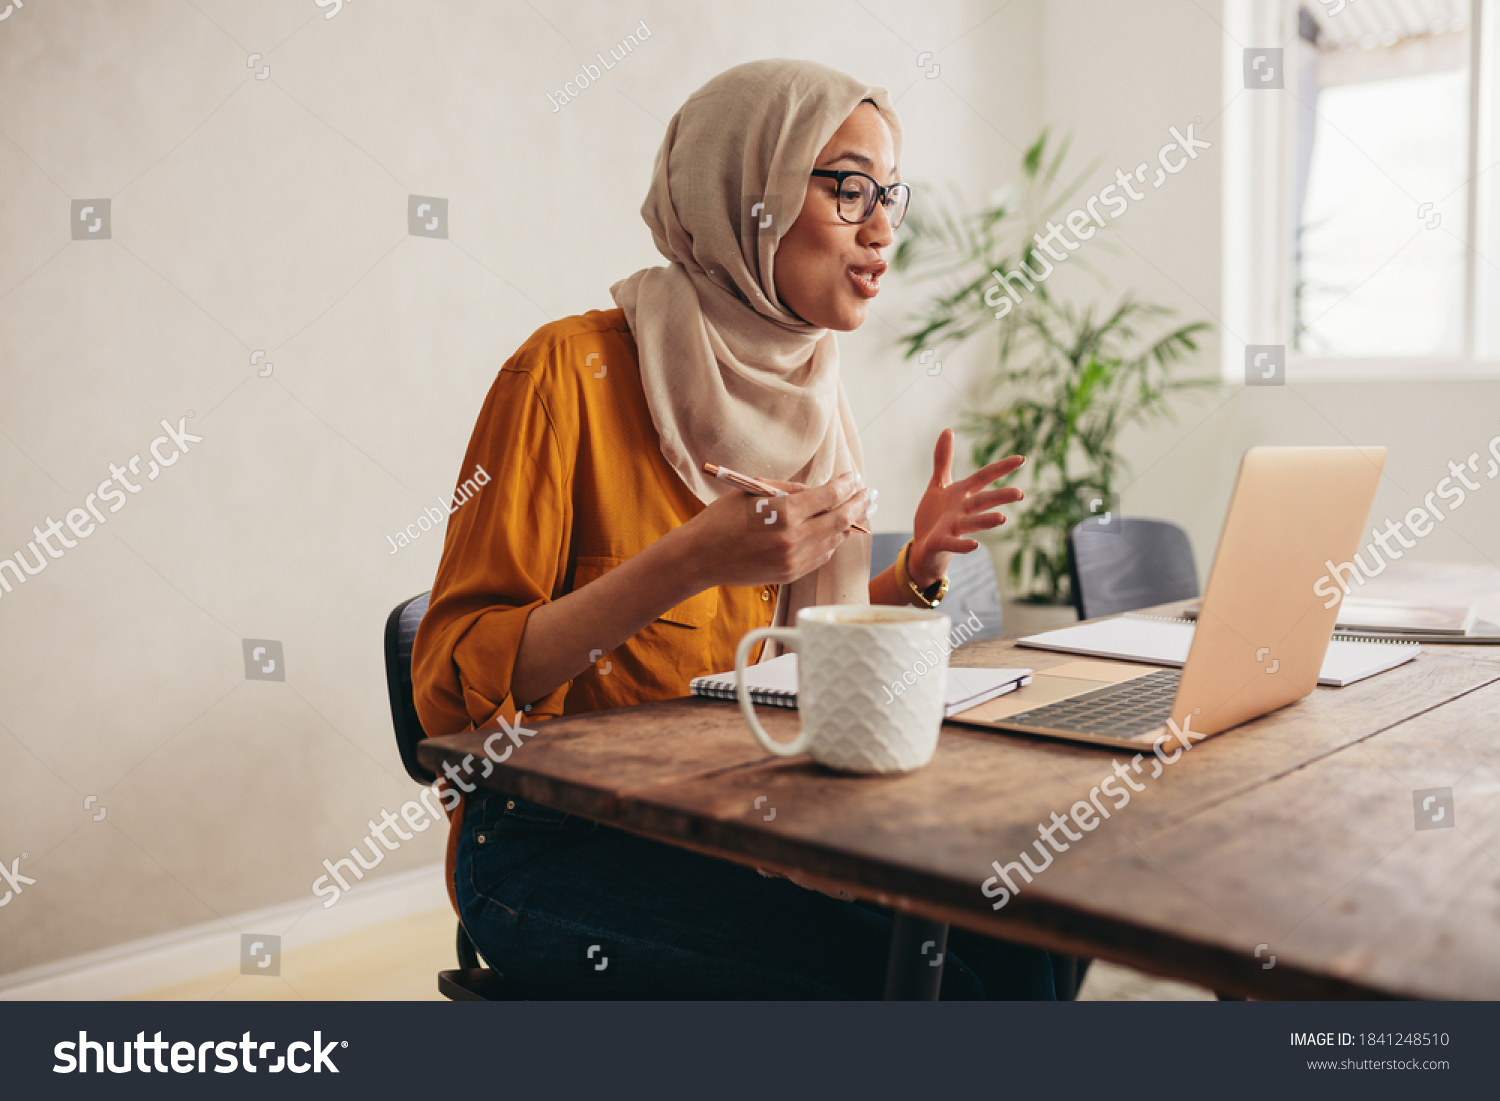 Muslim businesswoman working at home due to pandemic isolation. Female wearing hijab talking over a video call with team. #1841248510